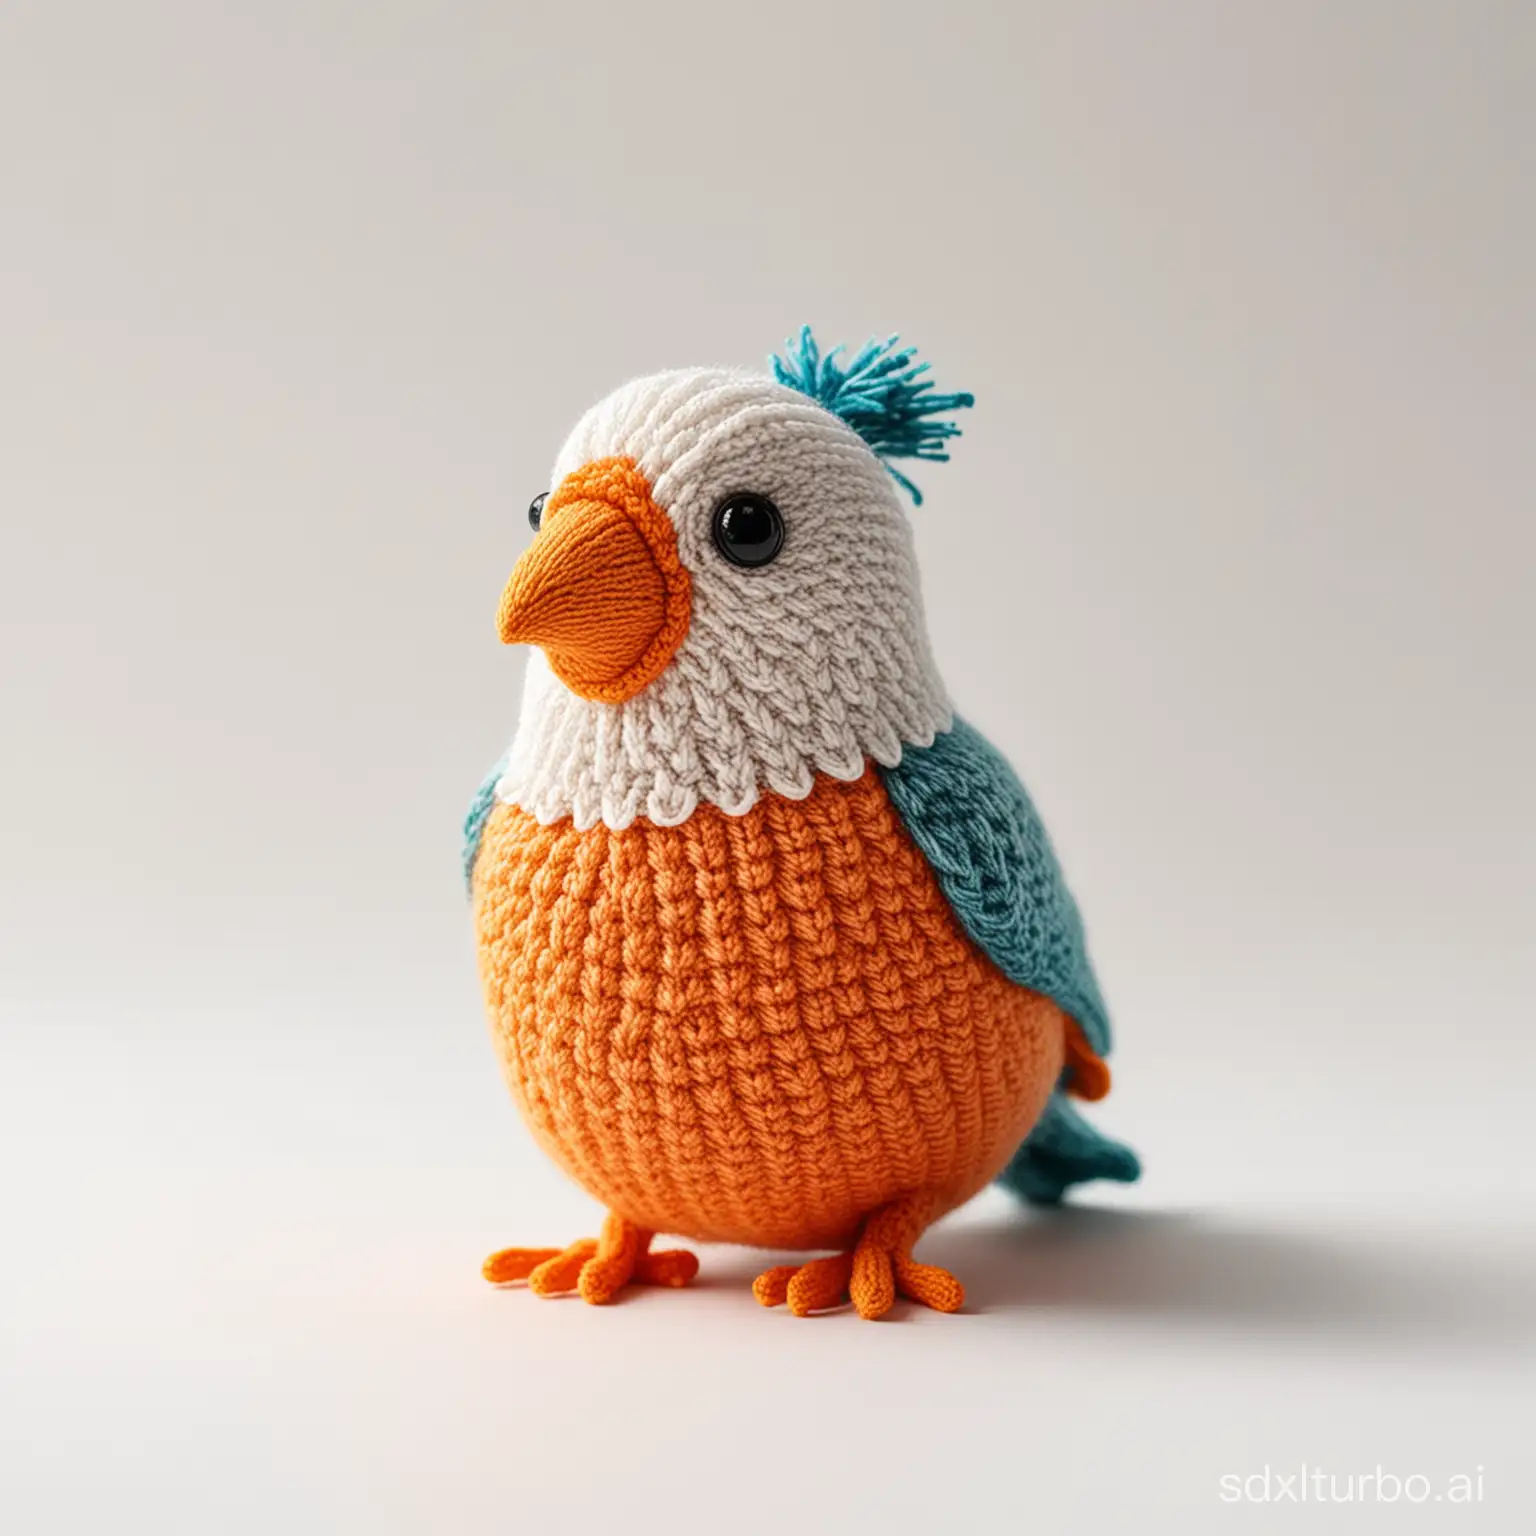 Colorful-Realistic-Knitted-Bird-Product-Photography-on-White-Background